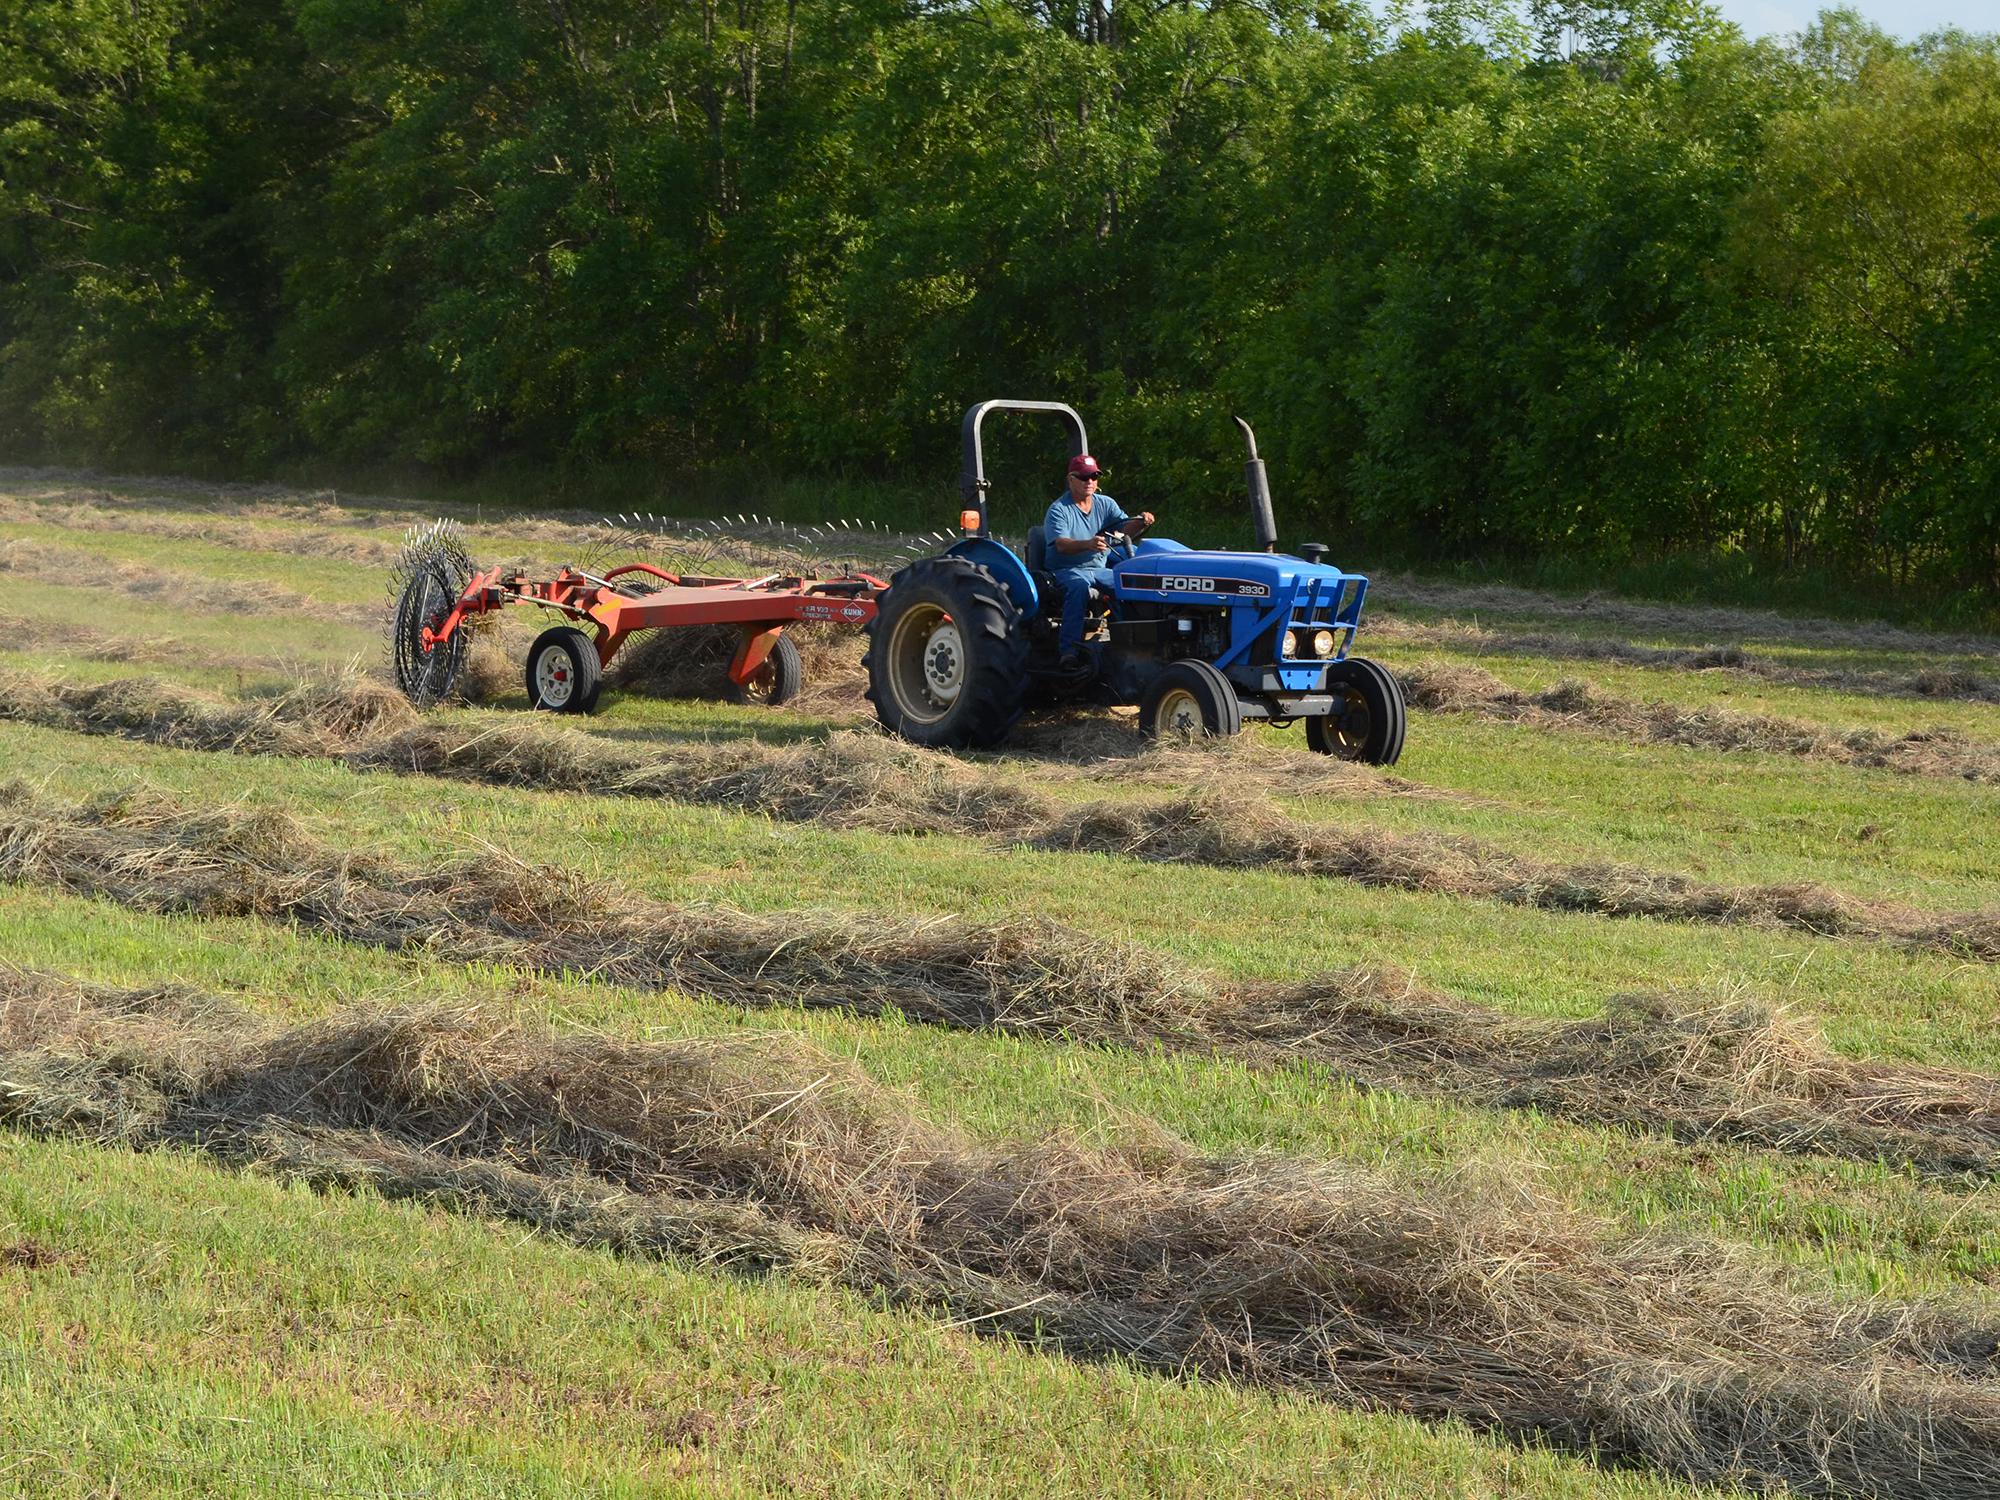 Johnny Howell rakes his last row of hay before moving on to the next field on Aug. 3, 2016, in the Bell Schoolhouse Community north of Starkville, Mississippi. The state’s hay production is projected to fall slightly this year, as growers face heat-induced infestations of fall armyworms. (Photo by MSU Extension Service/Linda Breazeale)